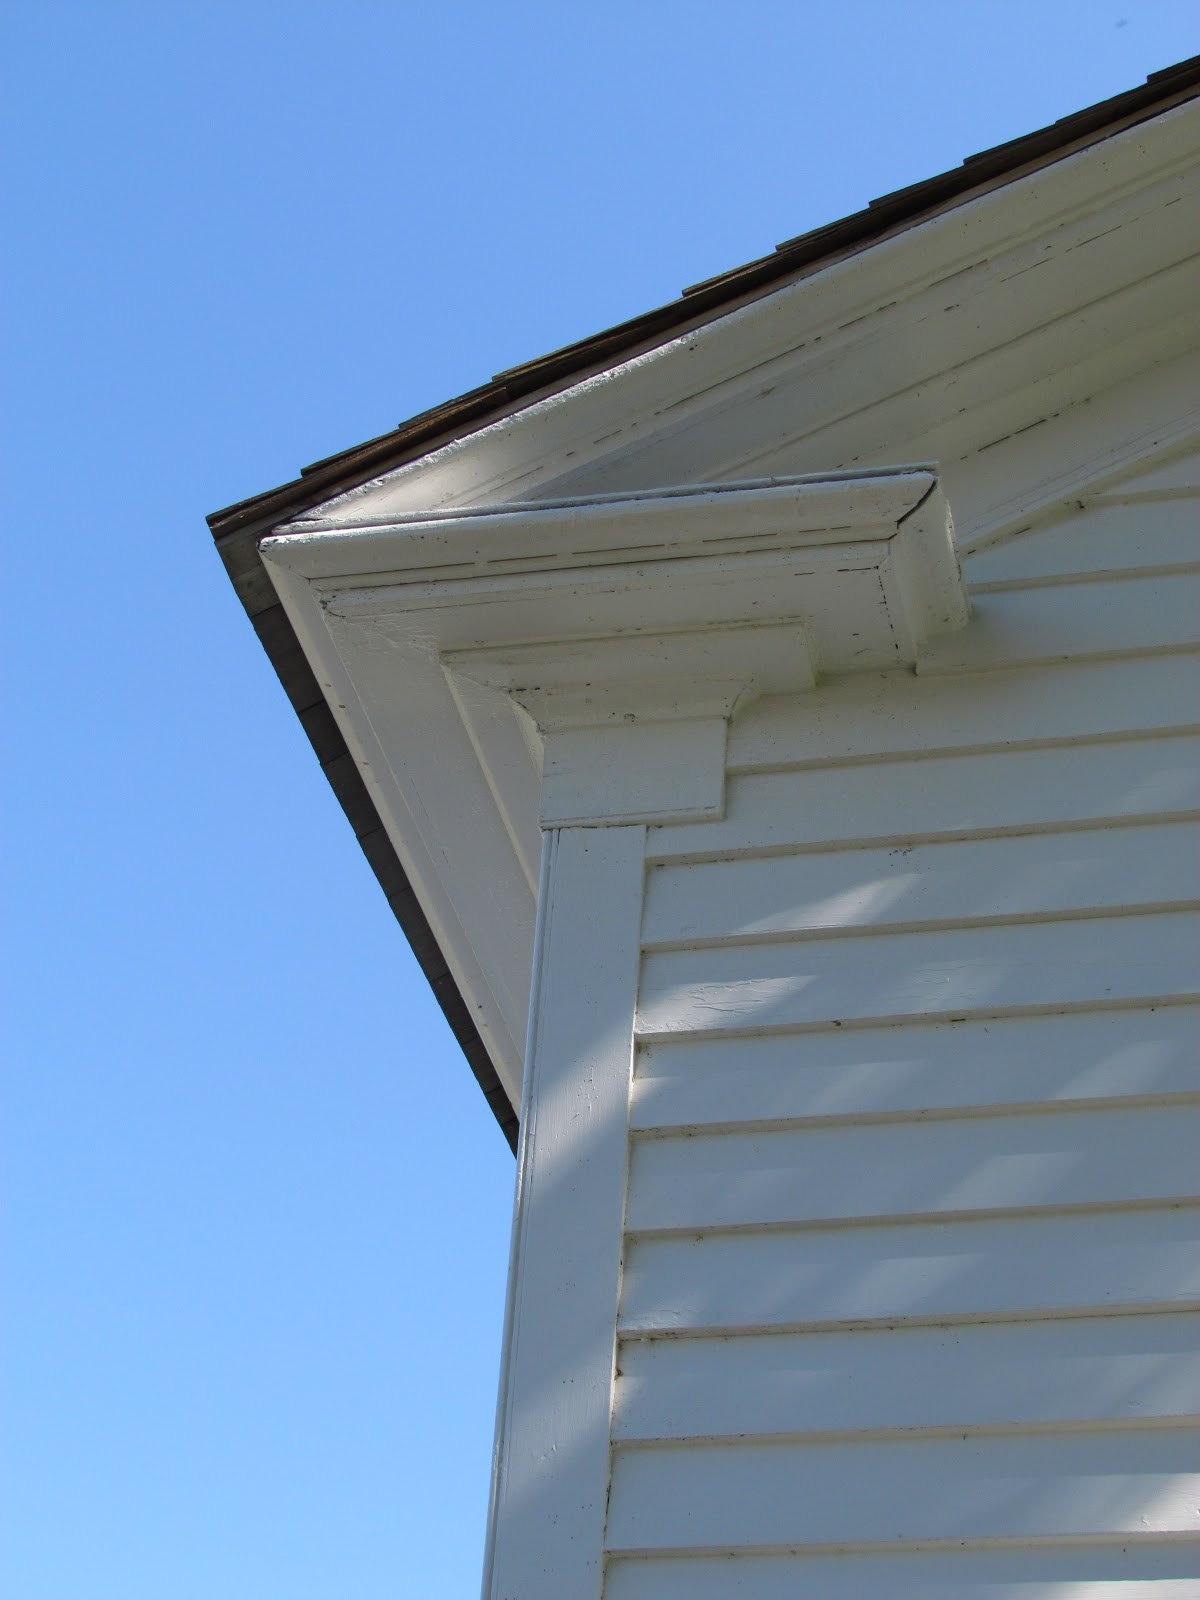 ancestral roofs: This is NOT an eaves return